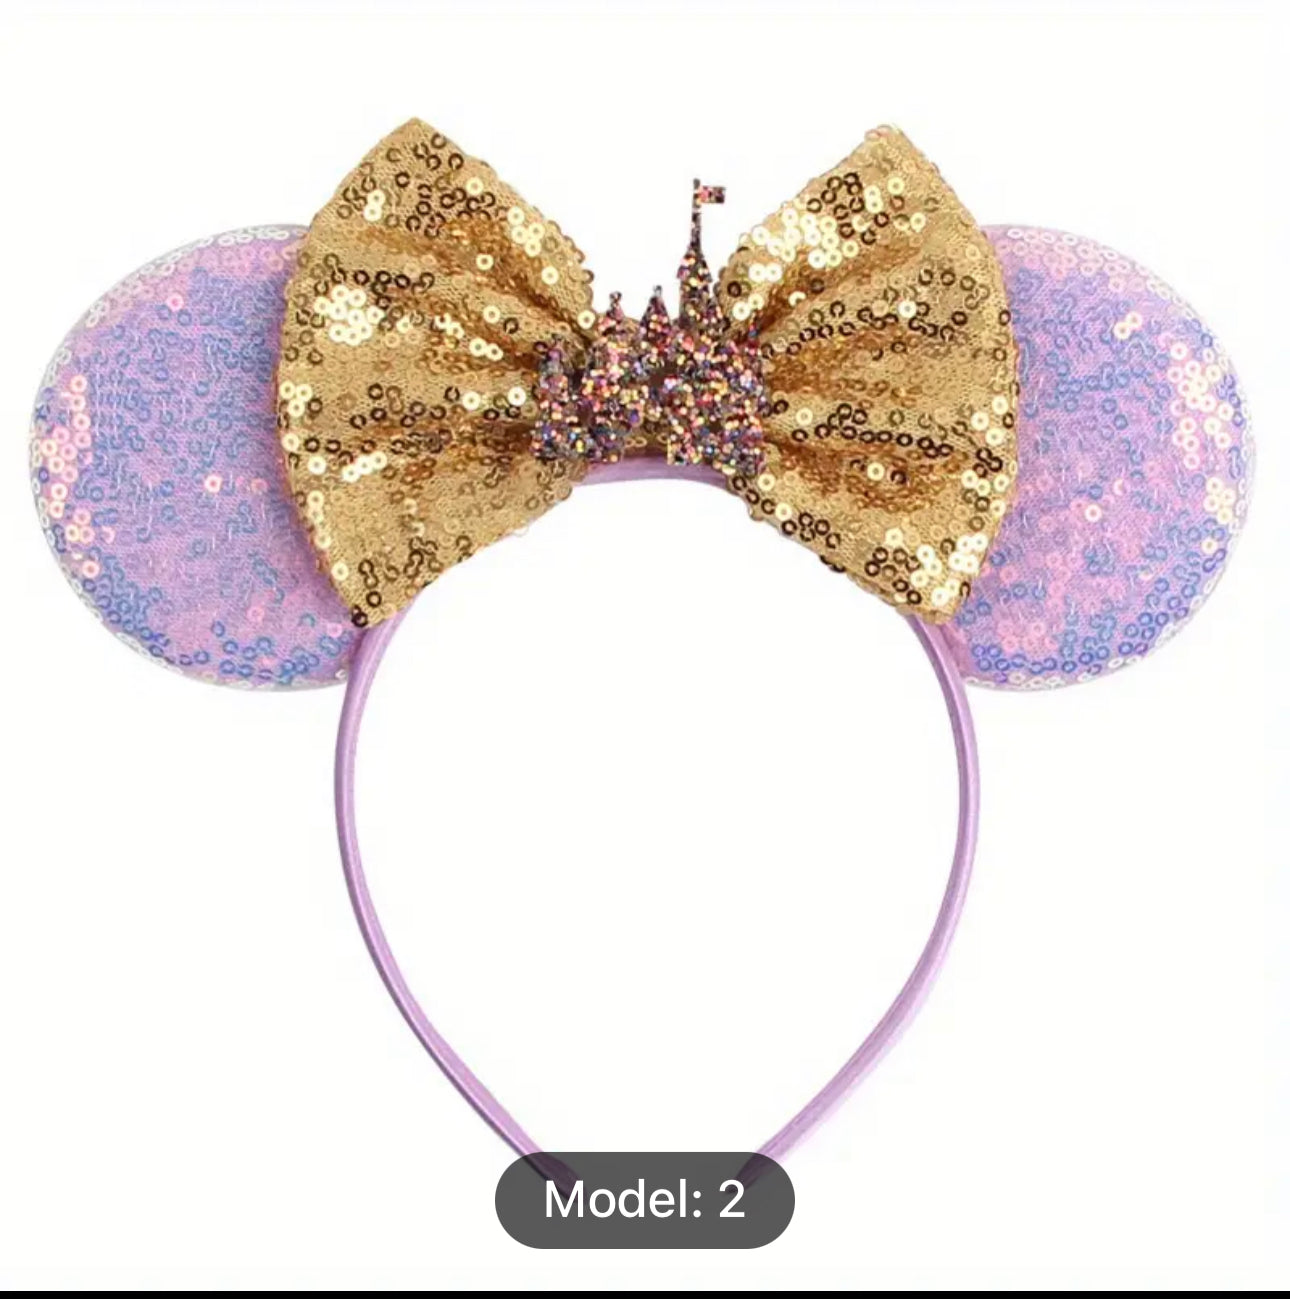 1pc Creative Bow Castle Hair Hoop, Mouse Ears Decorative Headwear, Holiday Party Hair Accessories For Girls